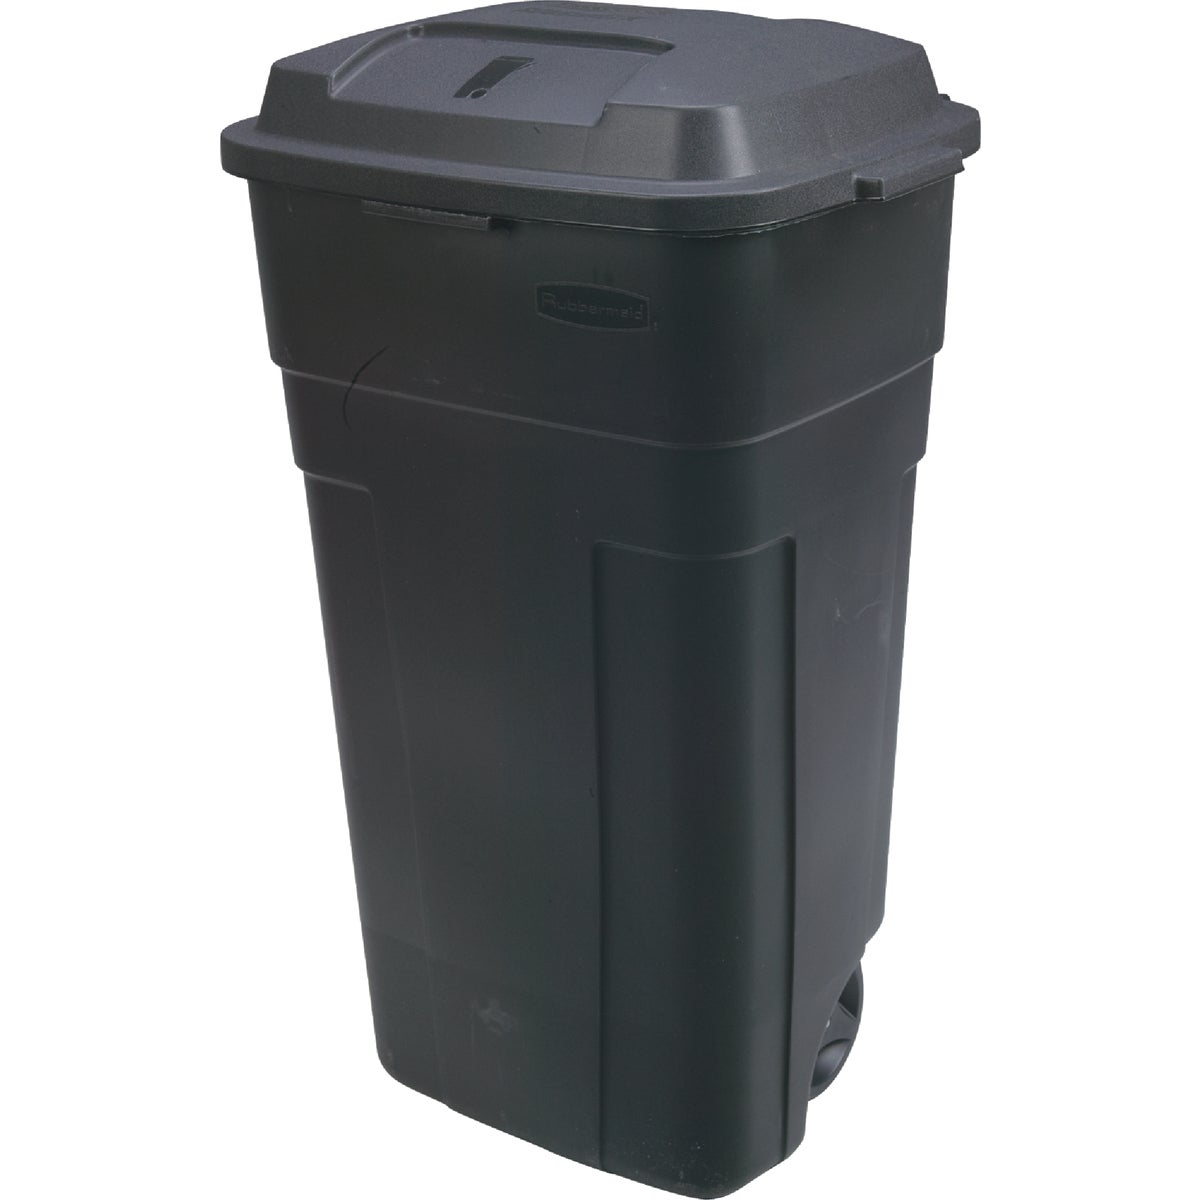 Item 634352, Injection molded. Heavy-duty wheeled refuse container.